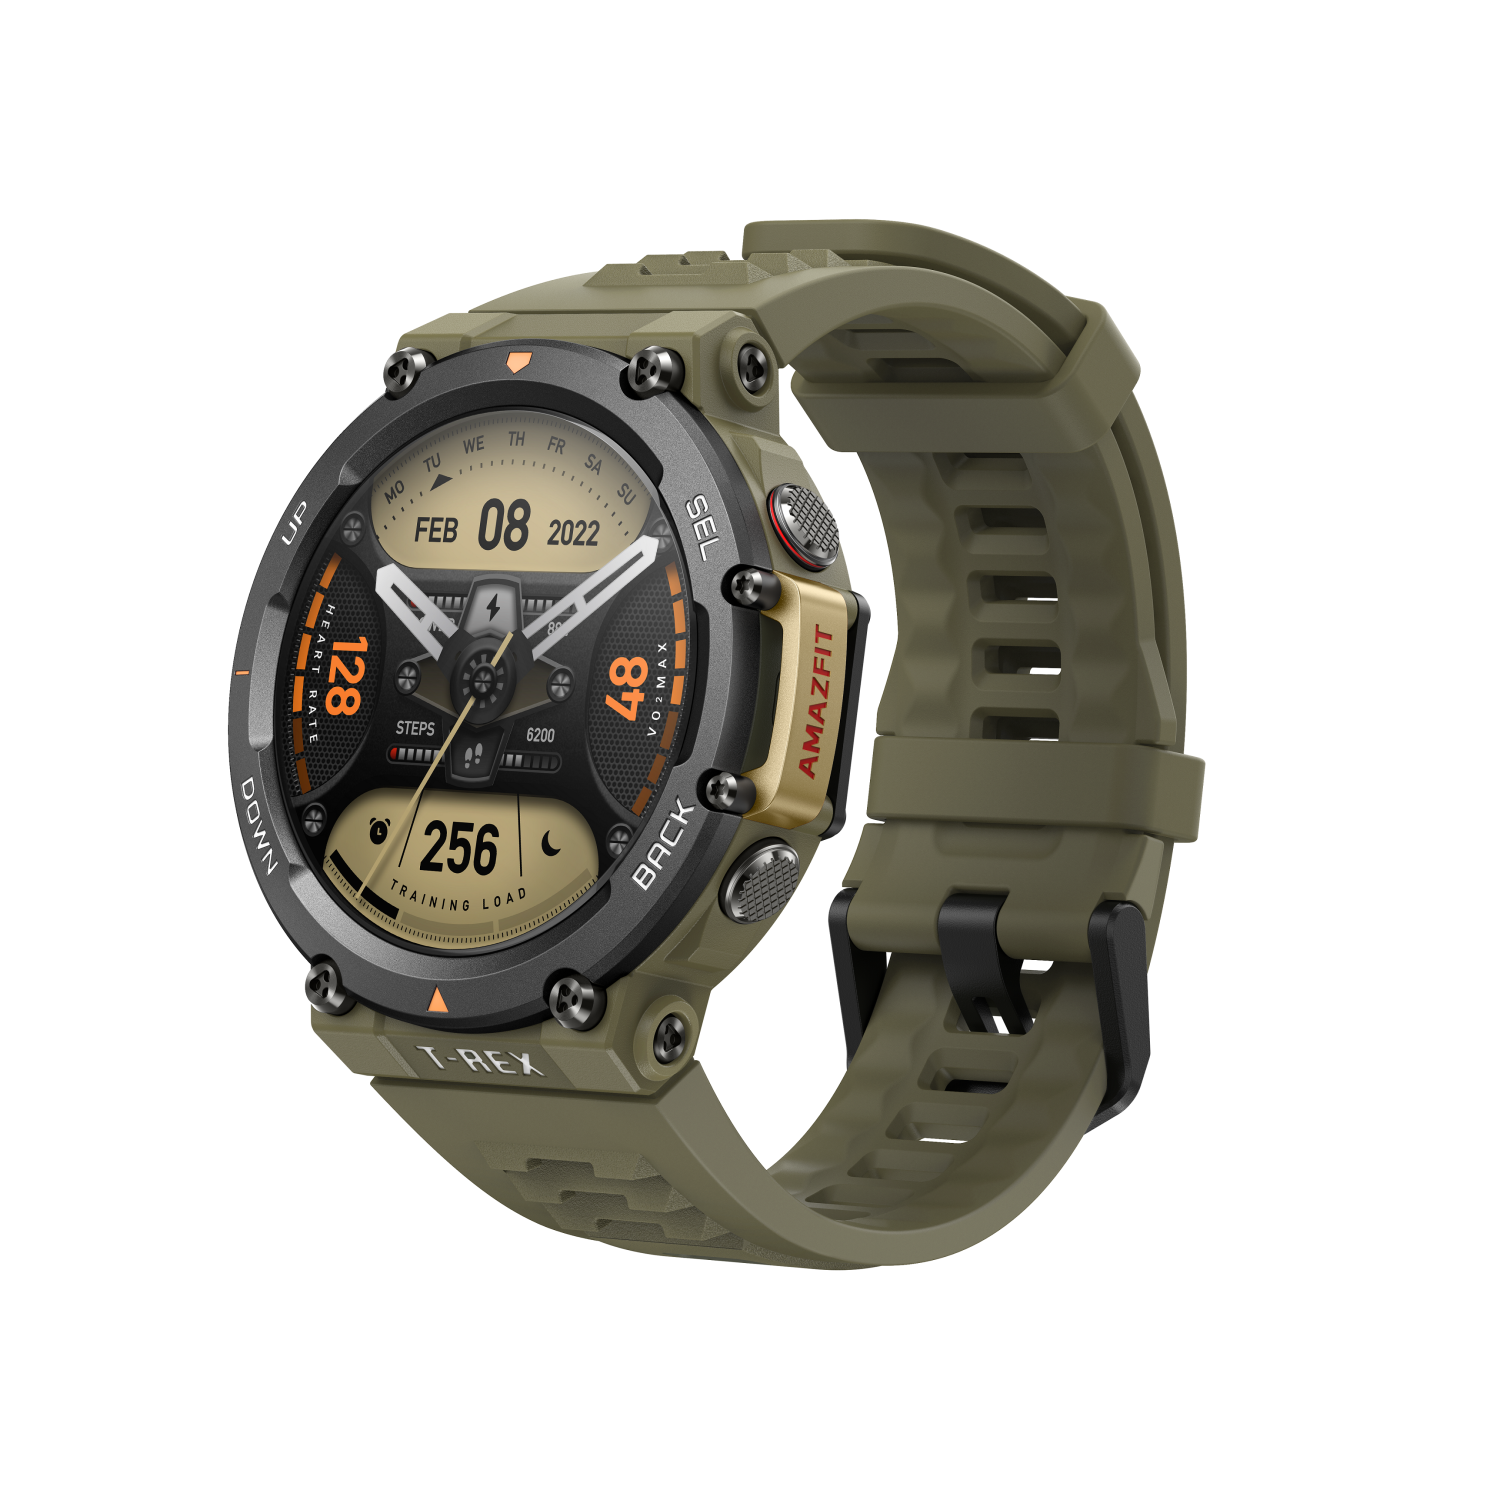 Amazfit T-Rex 2 Rugged Outdoor GPS Sports Fitness Smart Watch, 15 Military-Grade Tests, Real-time Navigation, 24-day Battery Life, 150+ Sports Modes, Waterproof (Green)